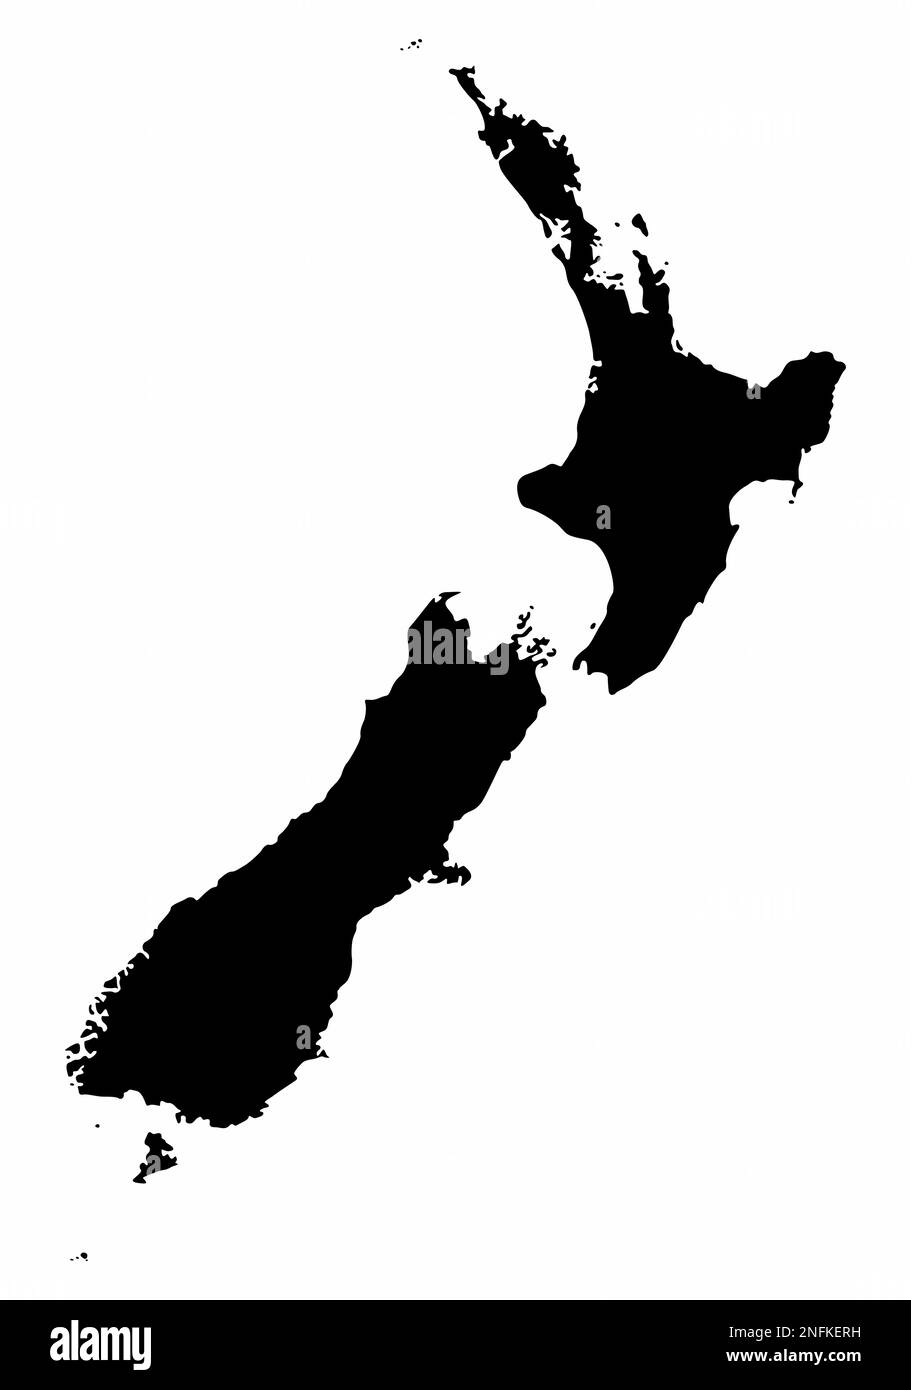 New Zealand map silhouette isolated on white background Stock Vector